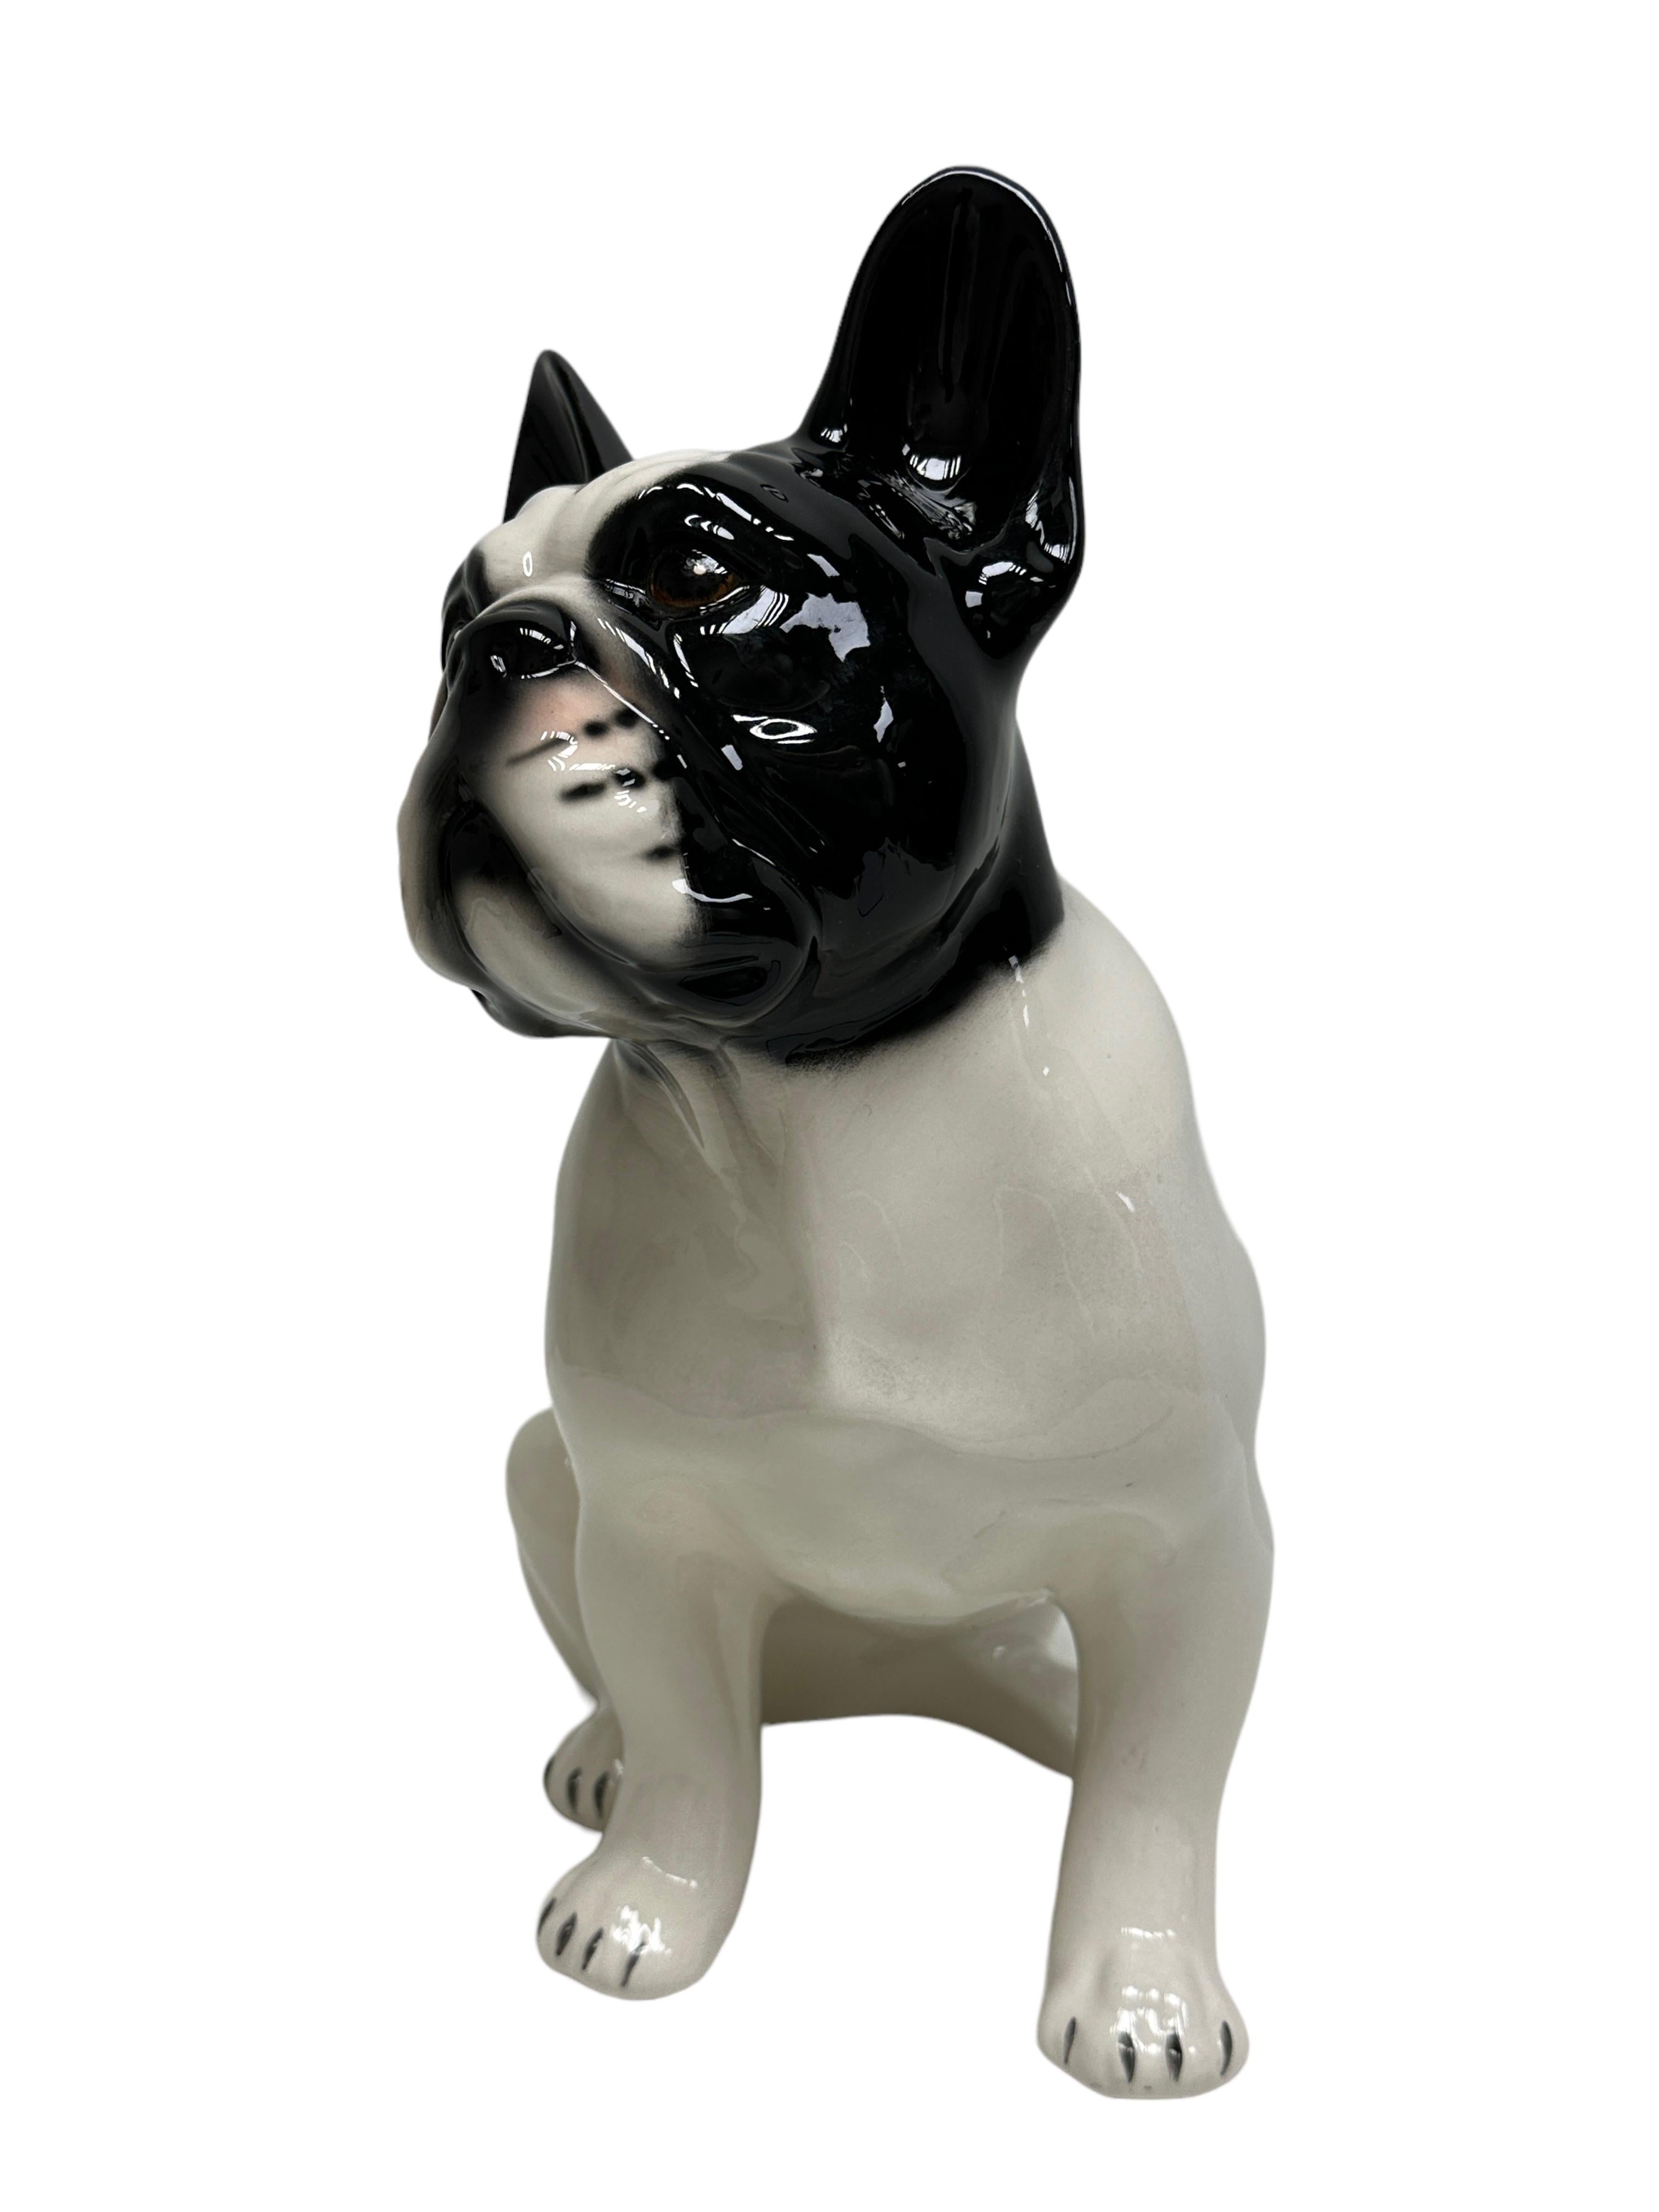 Classic 20th century ceramic figurine, in beautiful condition. Figurine Statue in the shape of a bull dog in black and white shades. It was made probably in the 1980s in Italy, it is marked at the ground.
Nice addition to your credenza or just for